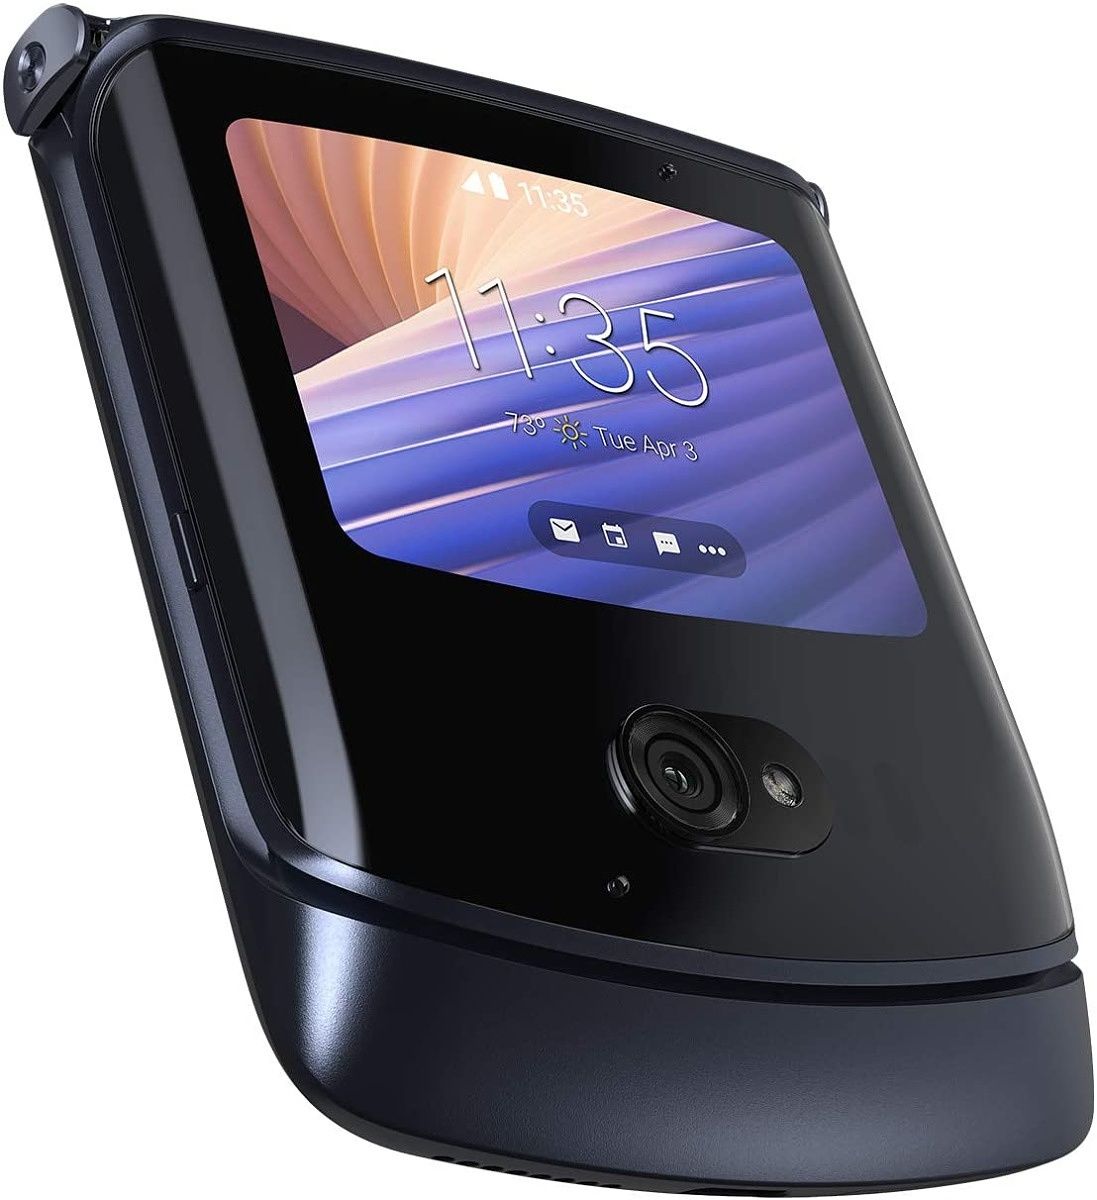 The Motorola Razr offers the best of both worlds, a compact design, that can be expanded into a full size smartphone